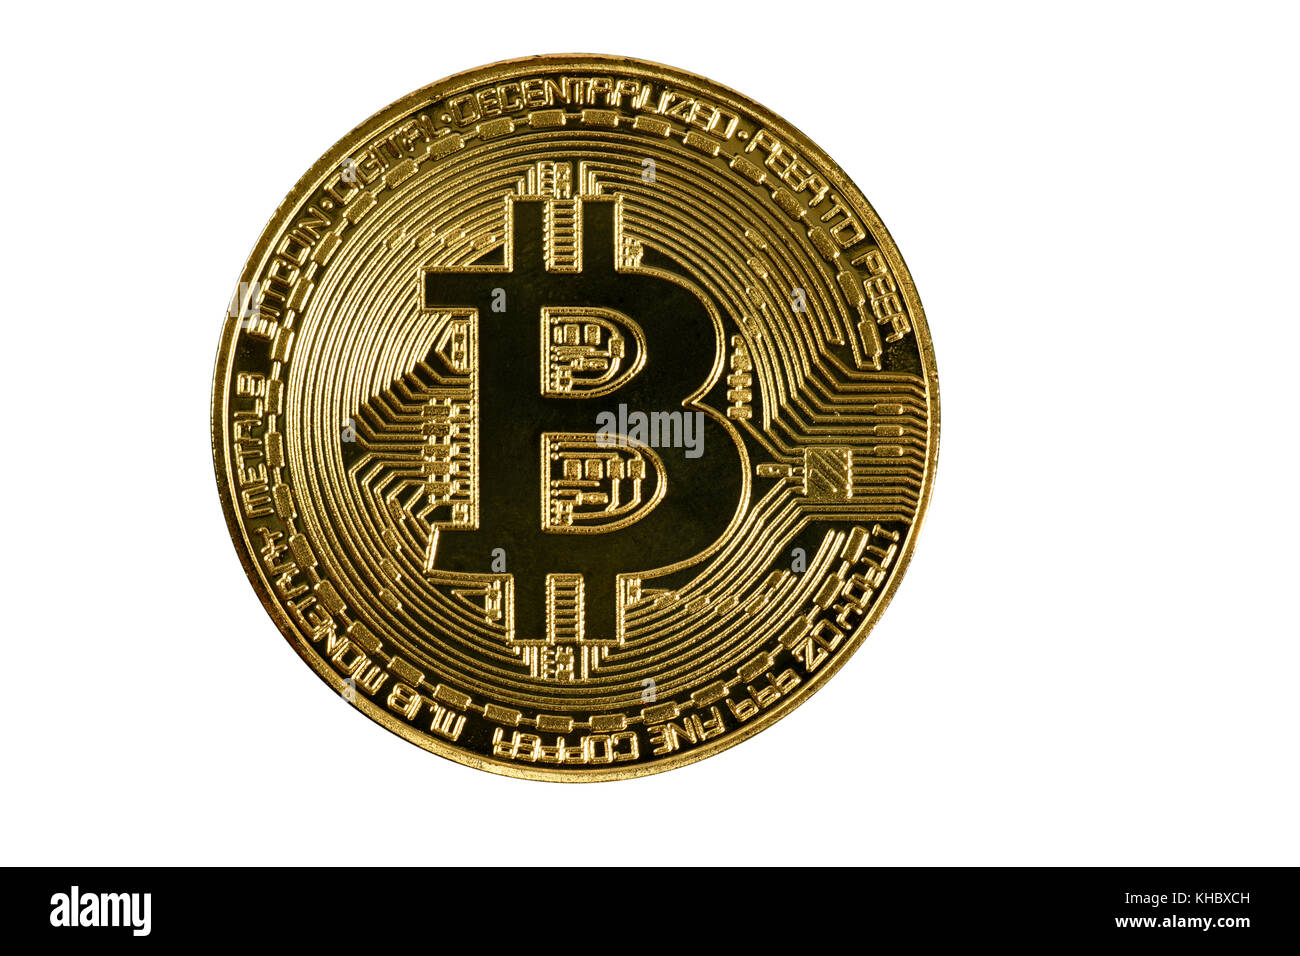 Symbol image digital currency, gold physical coin Bitcoin Stock Photo